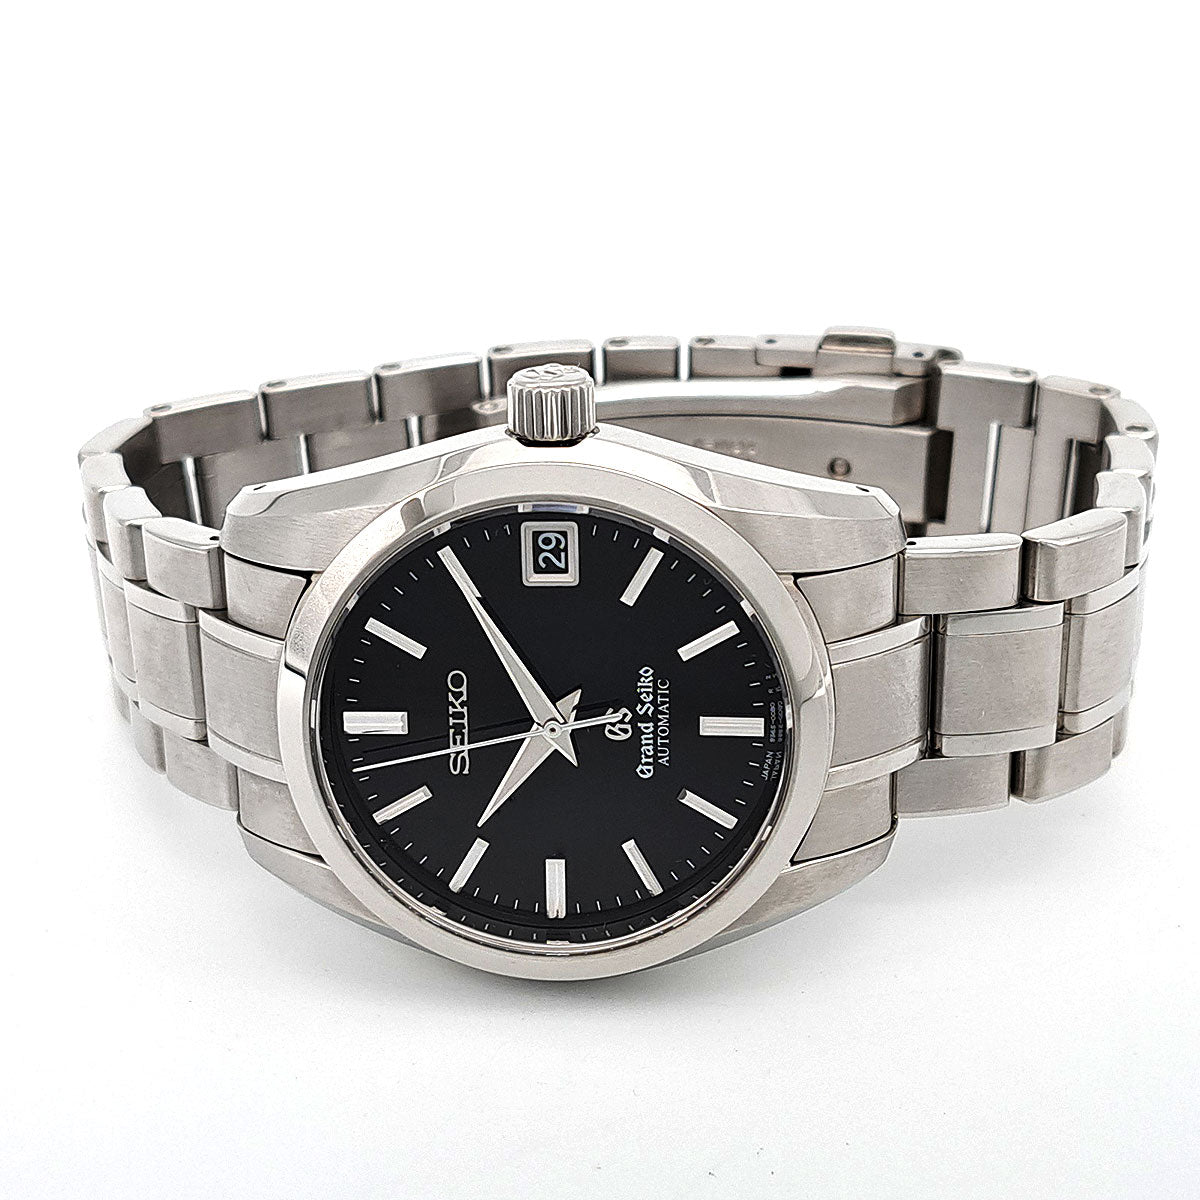 SEIKO Grand Seiko Mechanical SBGR053 Automatic Stainless Steel Men's Watch (Pre-Owned) SBGR053